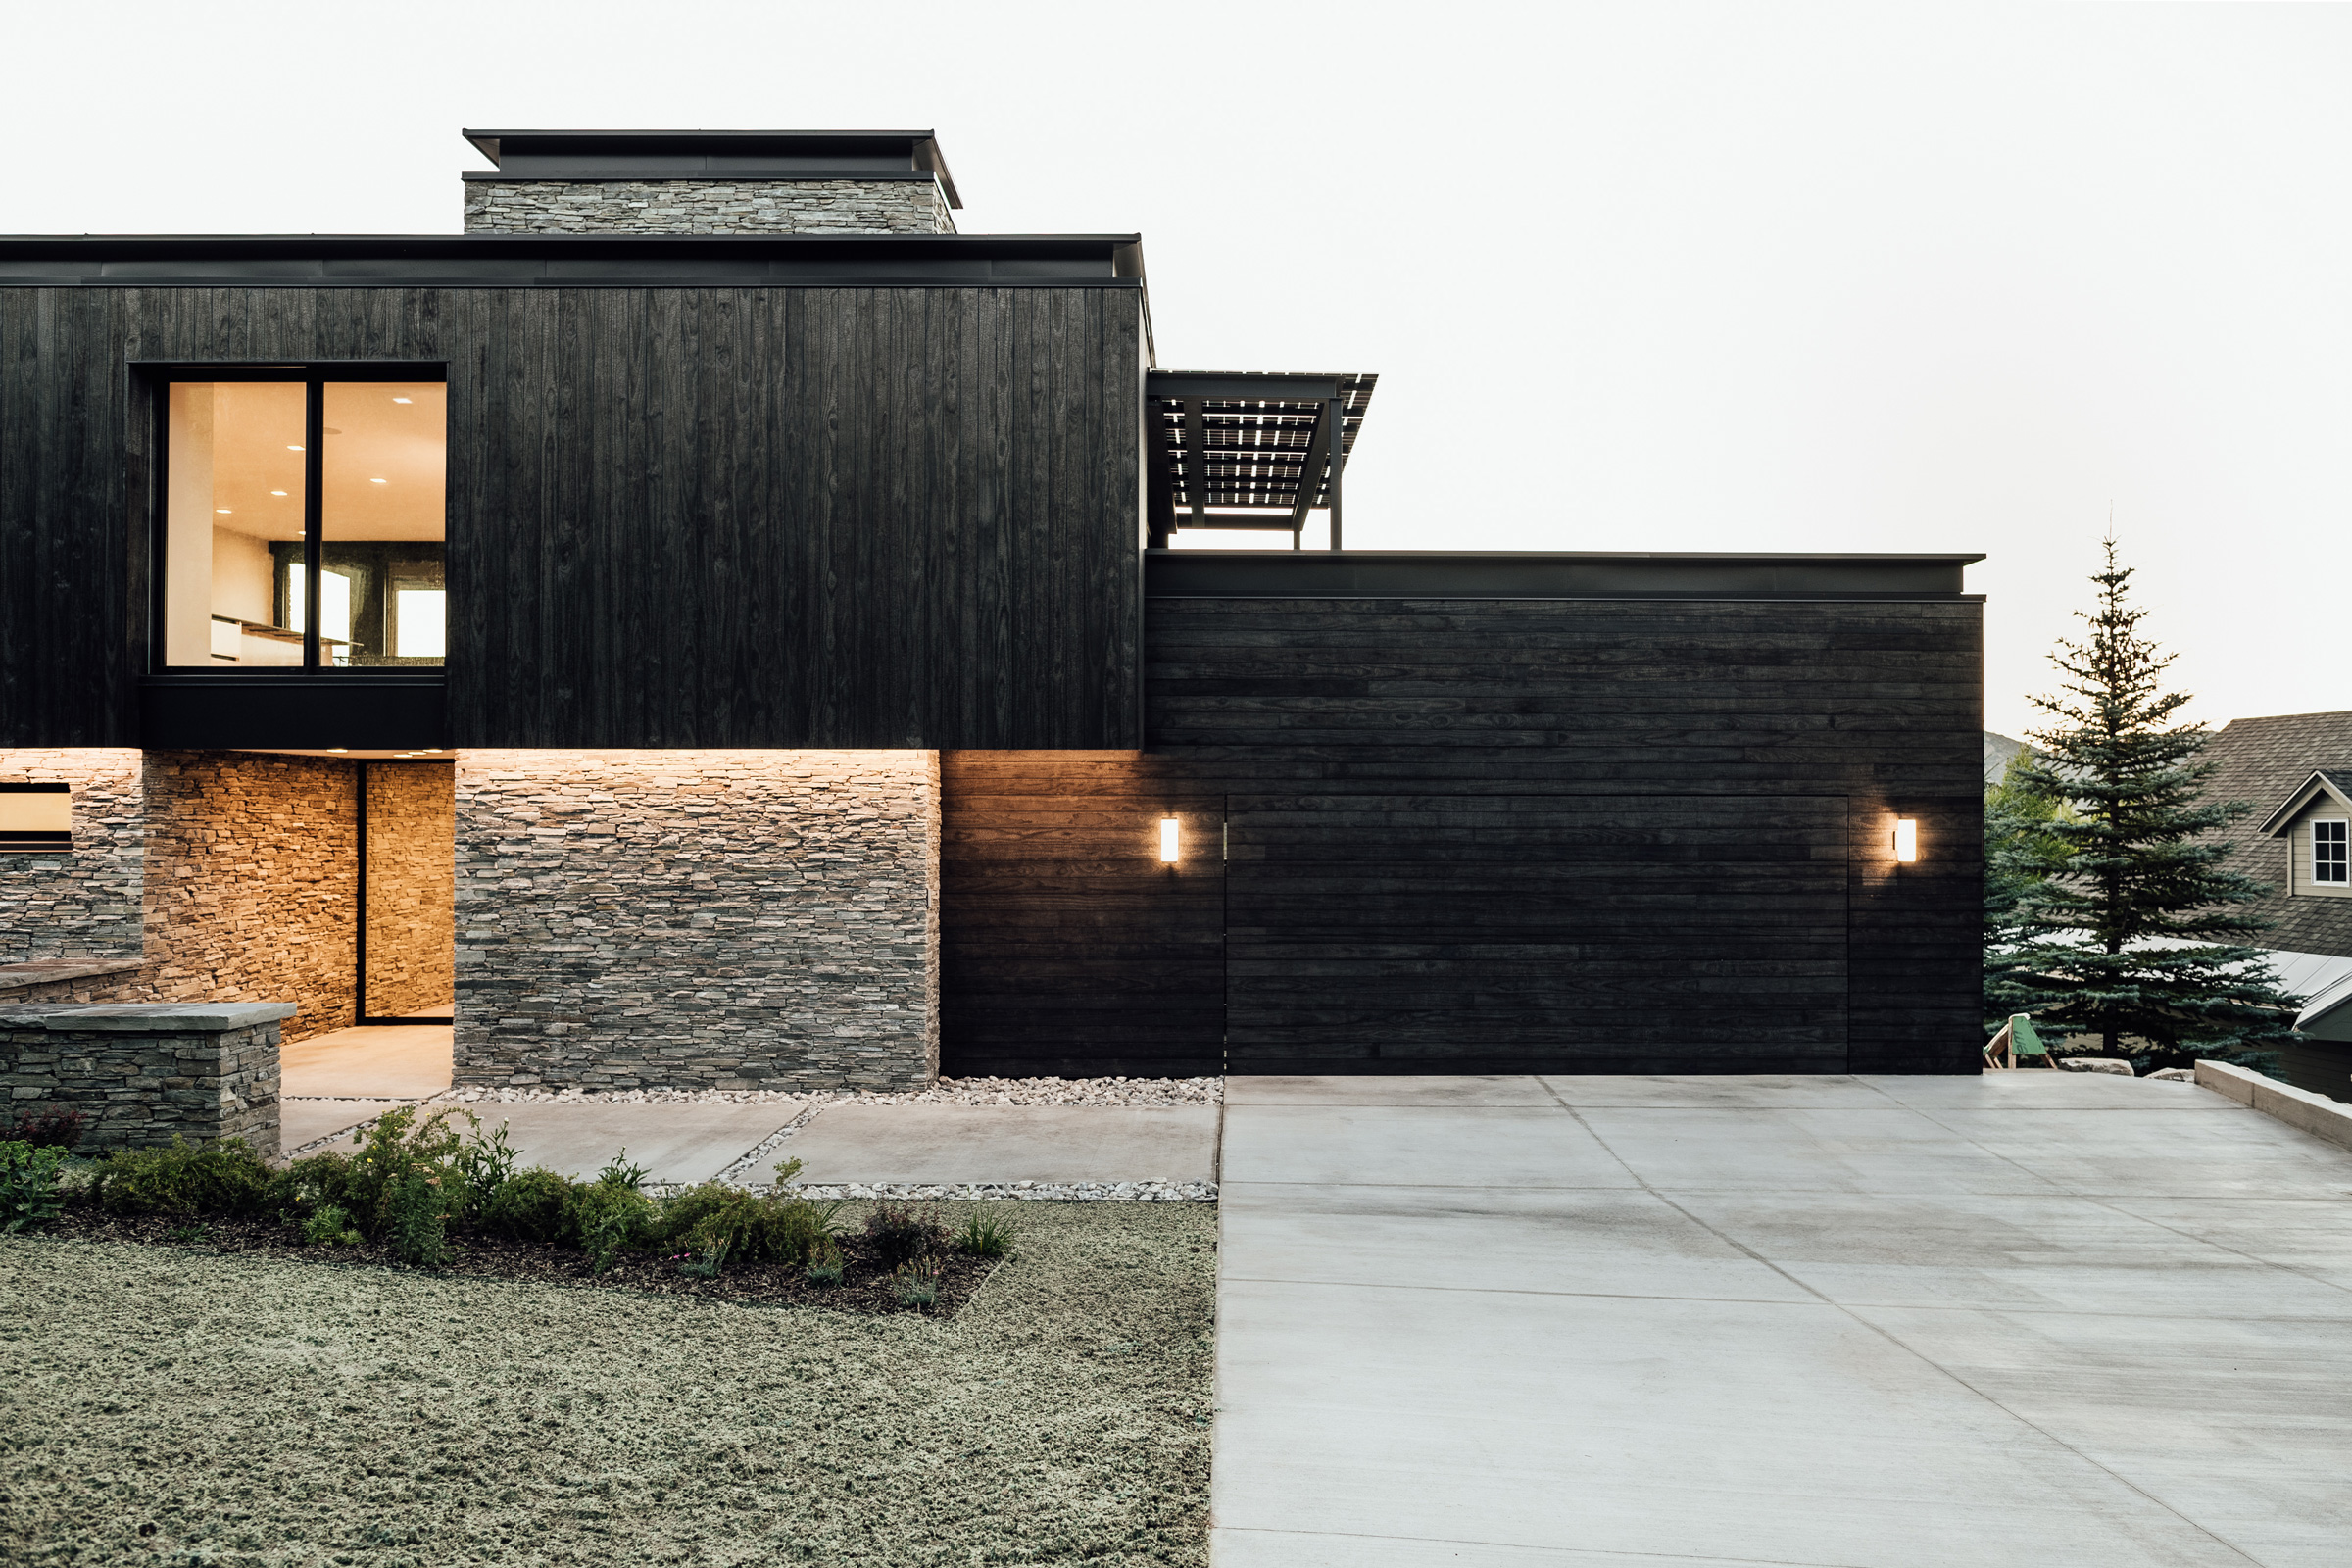 meadows passive house delta millworks benefits of high quality wood gbd magazine 05